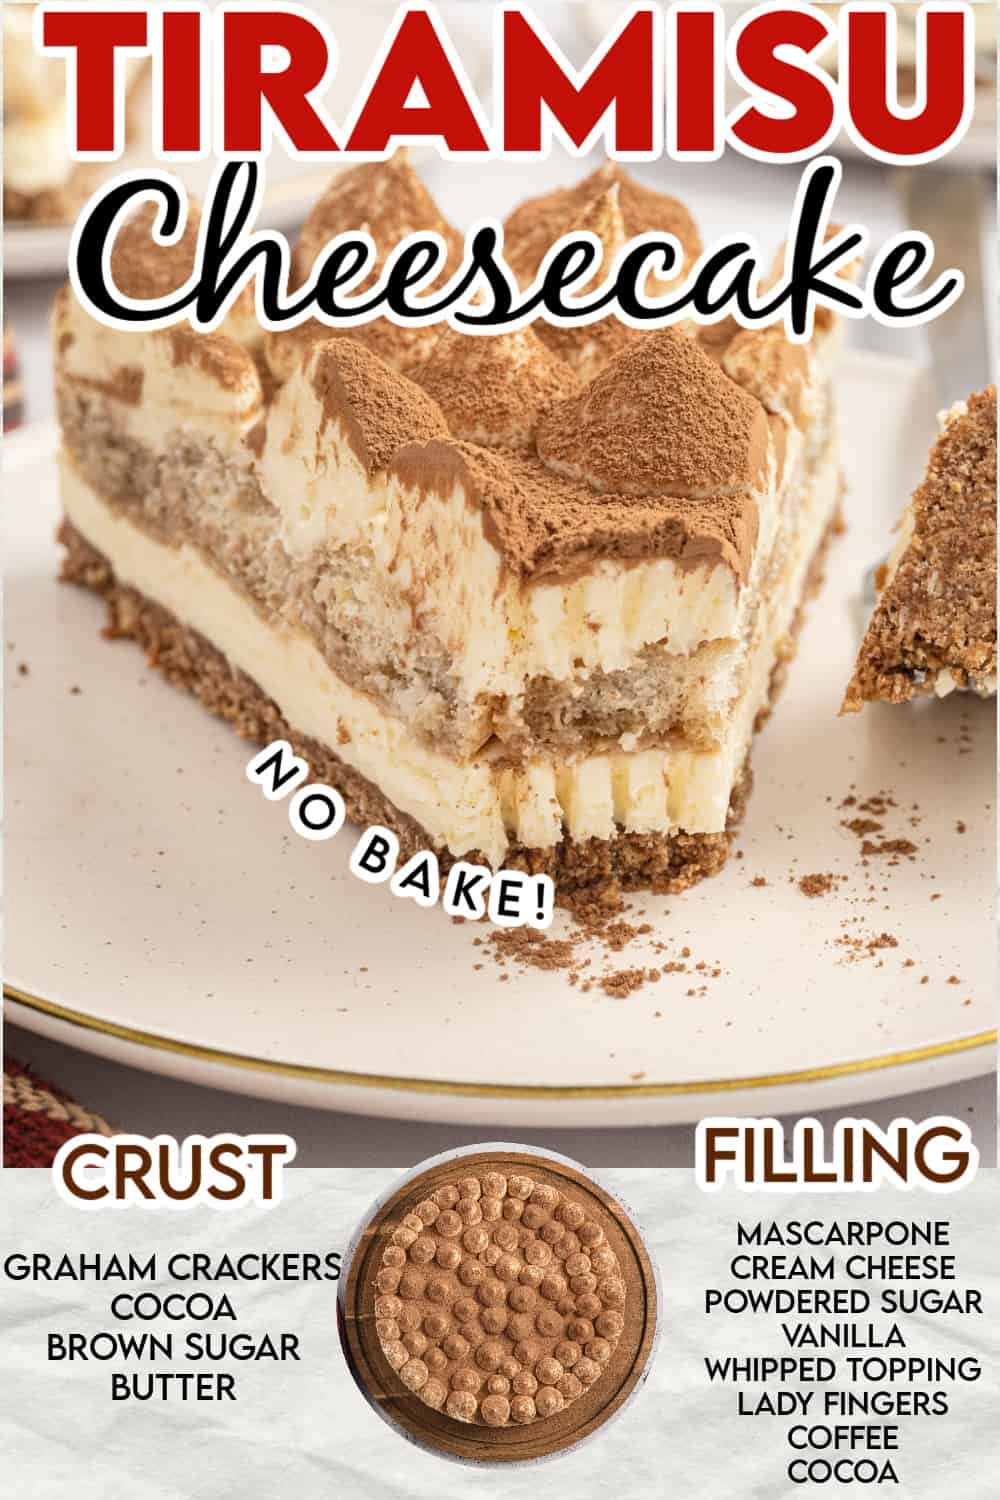 a slice of tiramisu cheesecake on a plate, with recipe and and ingredients overlaid in text.